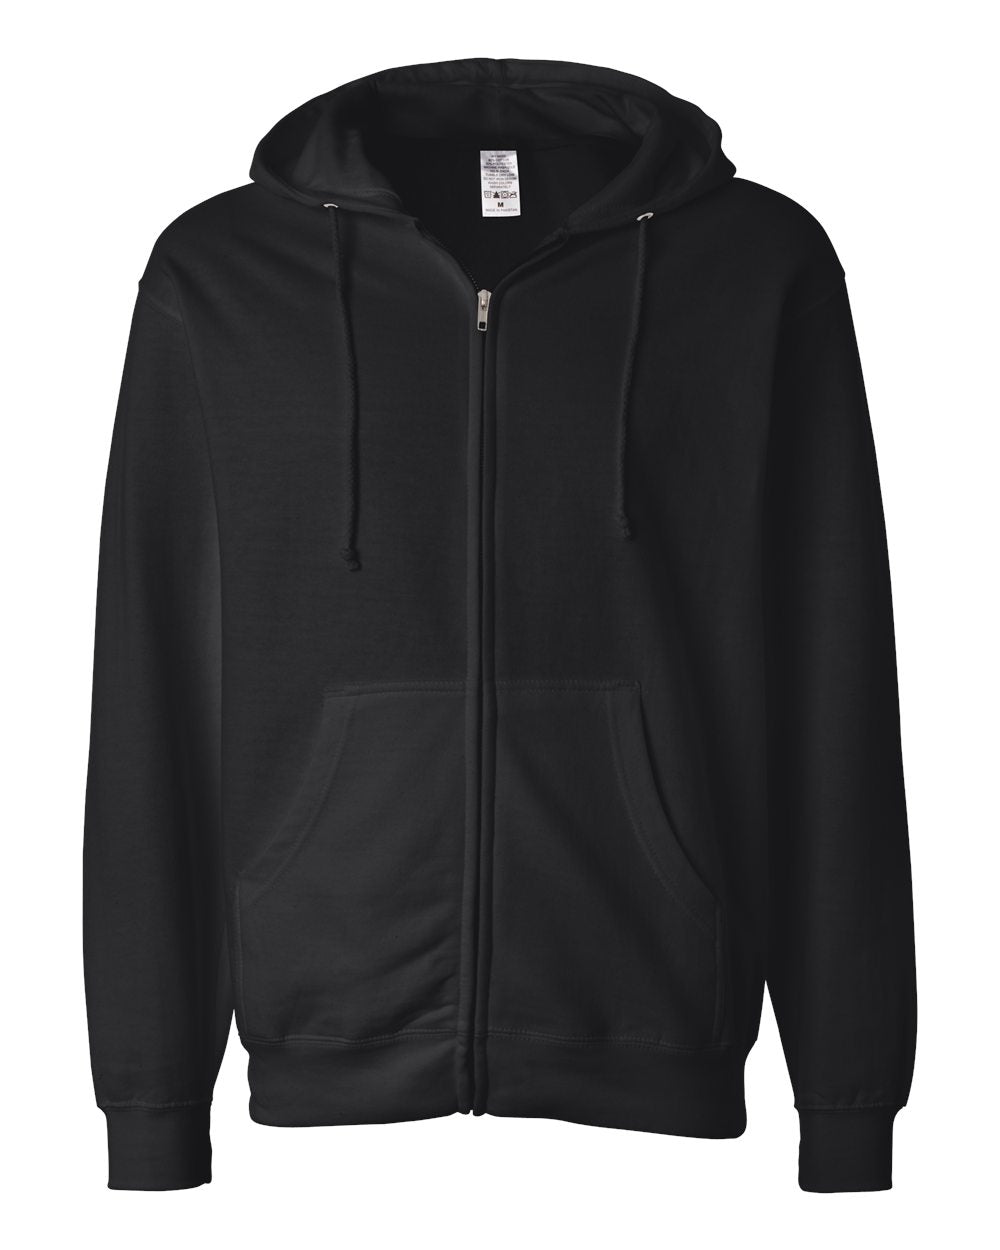 Independent Trading Co. - Midweight Full-Zip Hooded Sweatshirt - SS4500Z- XS - 3XL